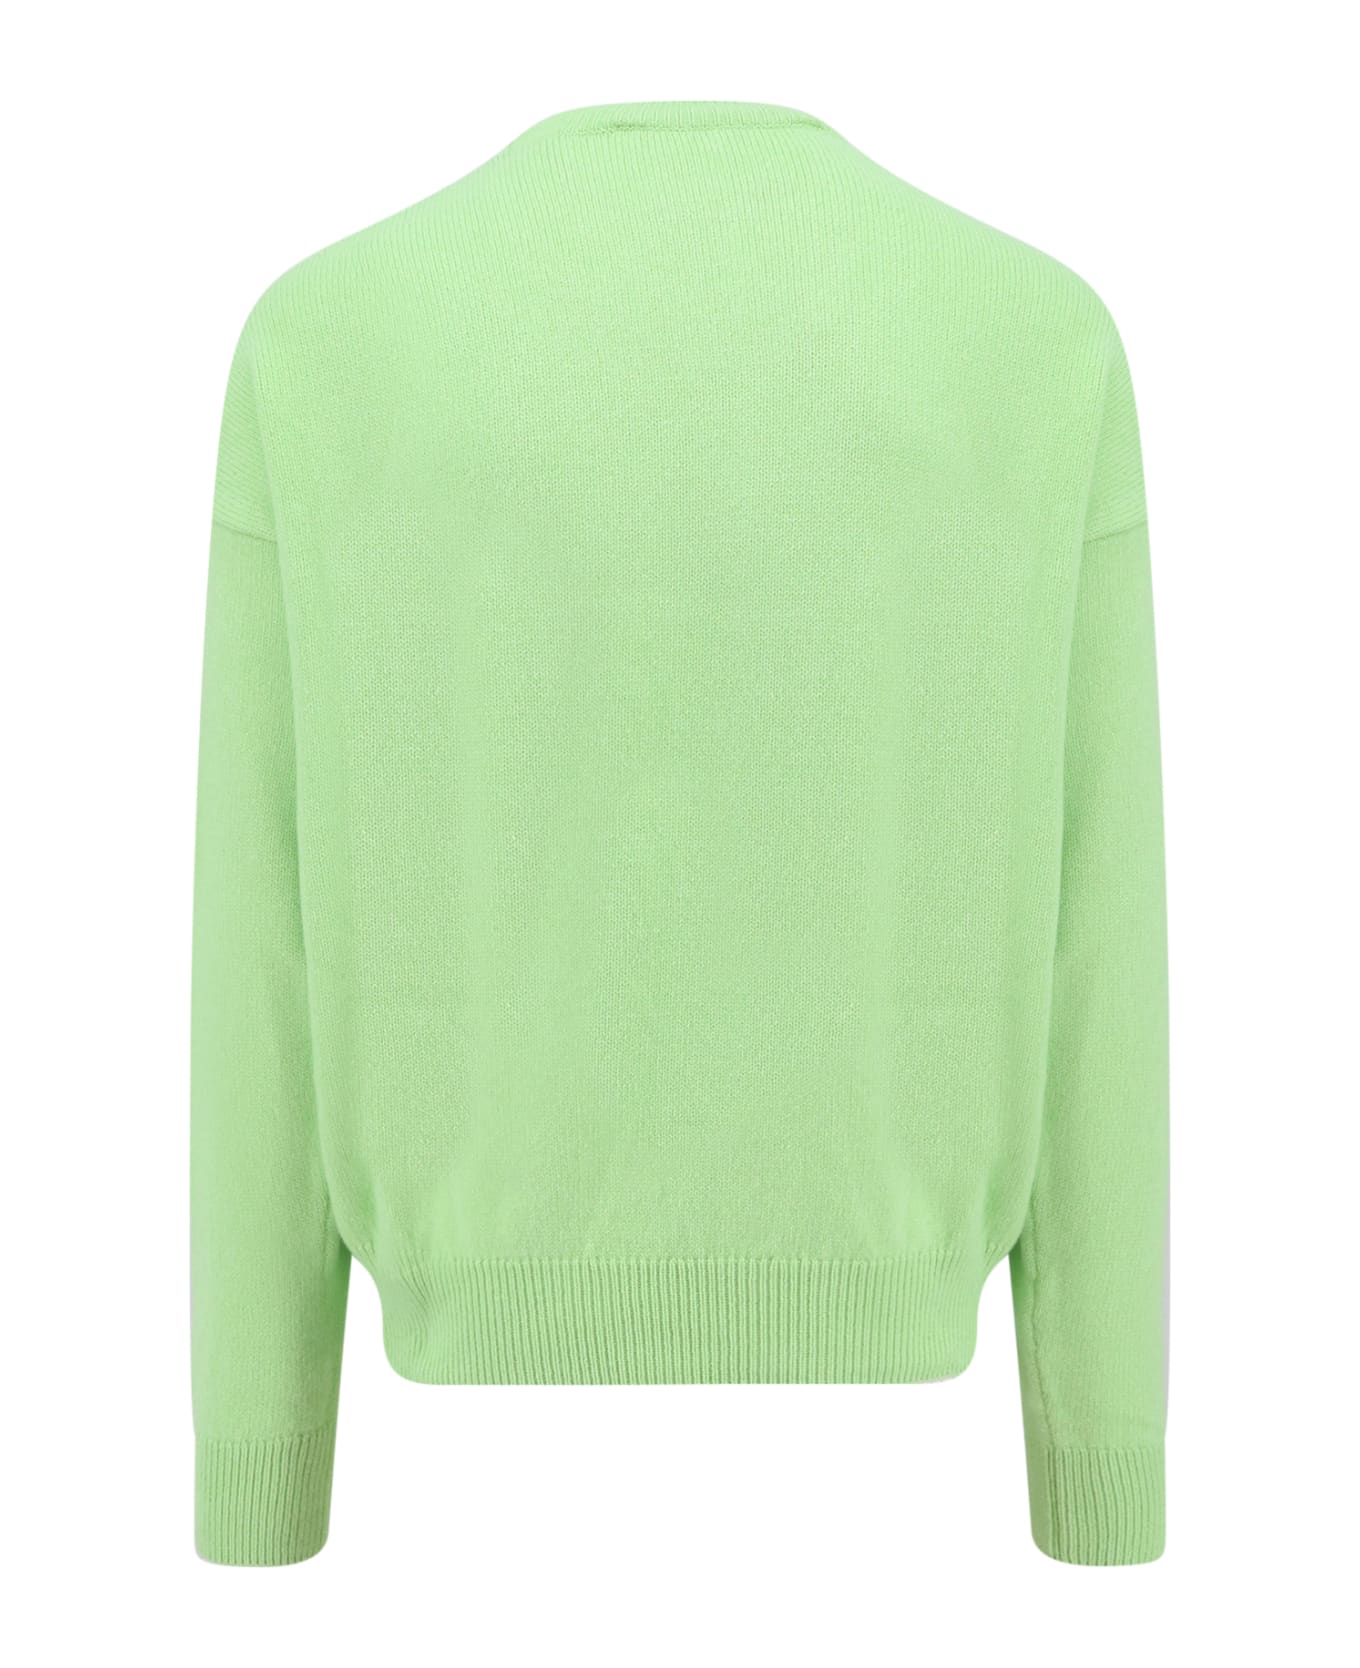 Palm Angels Douby Intarsia Sweater - Green ニットウェア